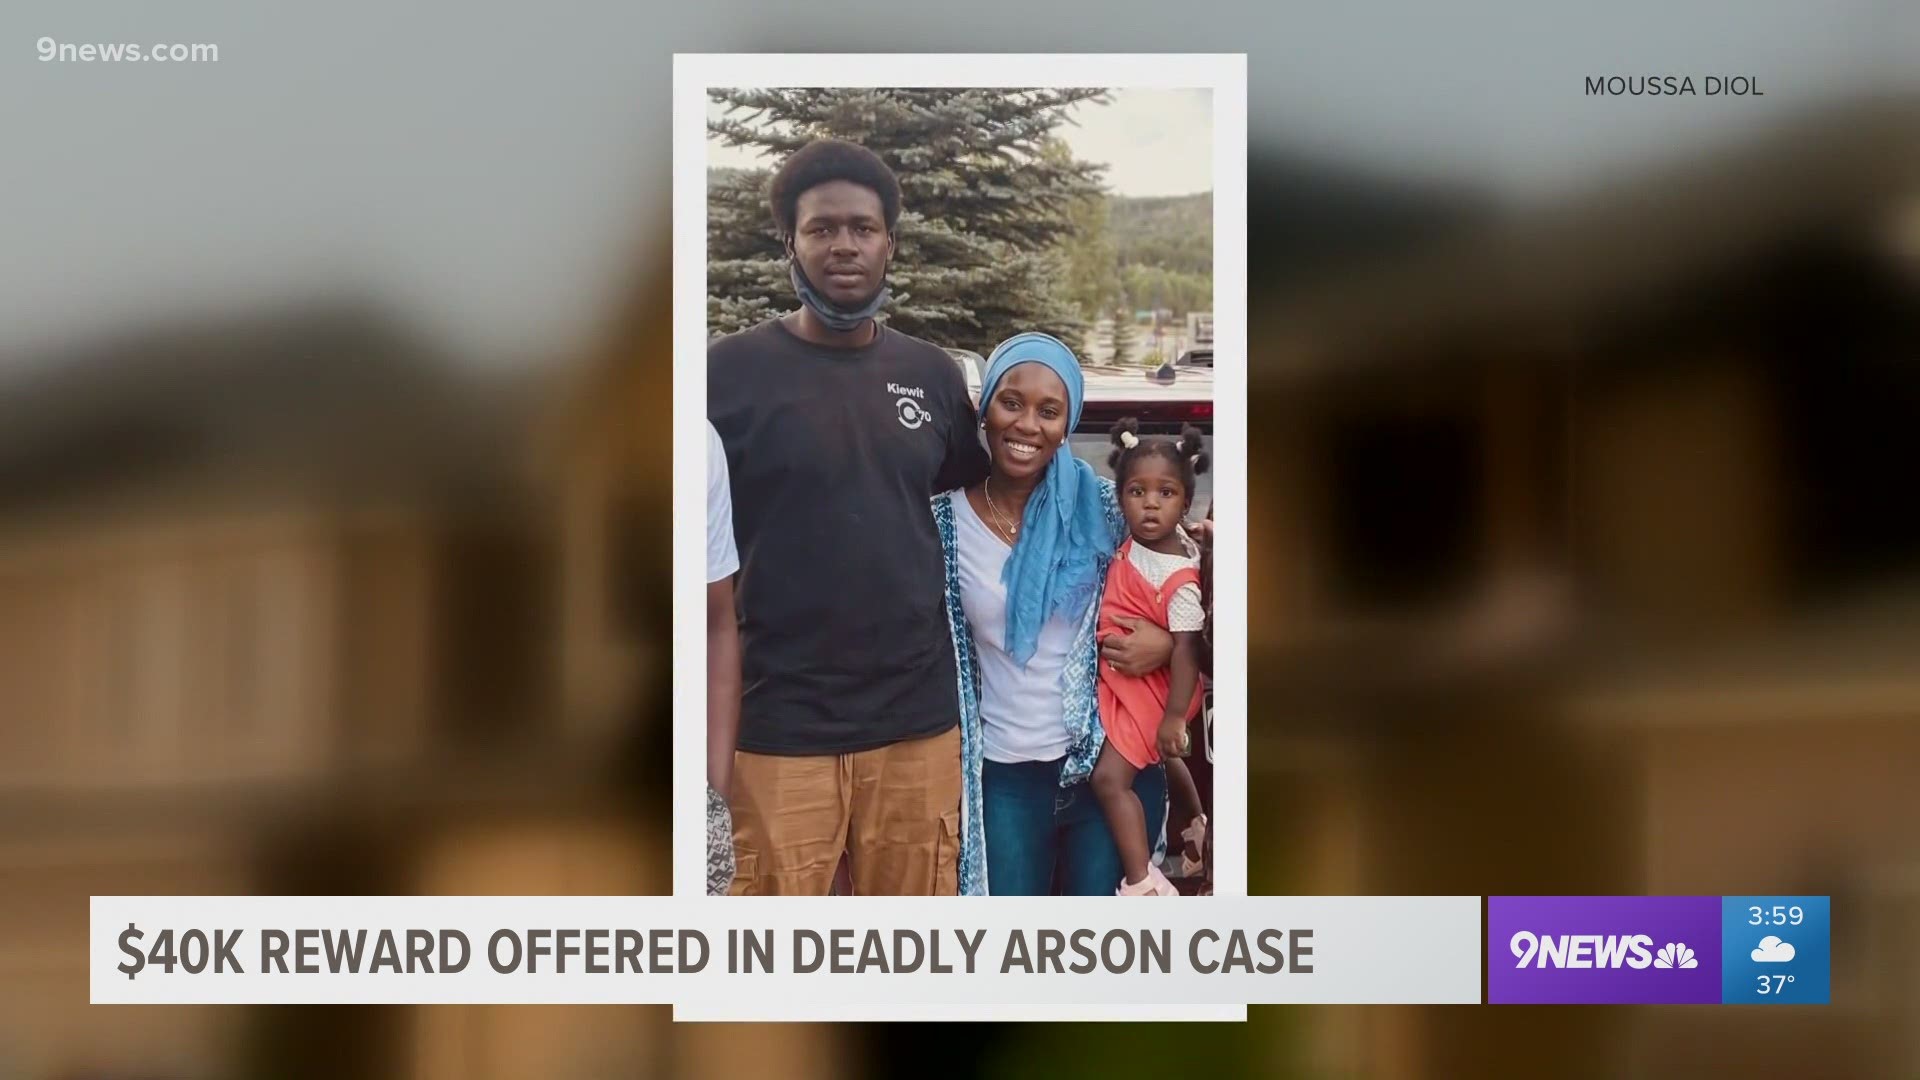 Dozens of tips have already come in related to the Aug. 5 arson at a Denver home that killed five people, including two small children.